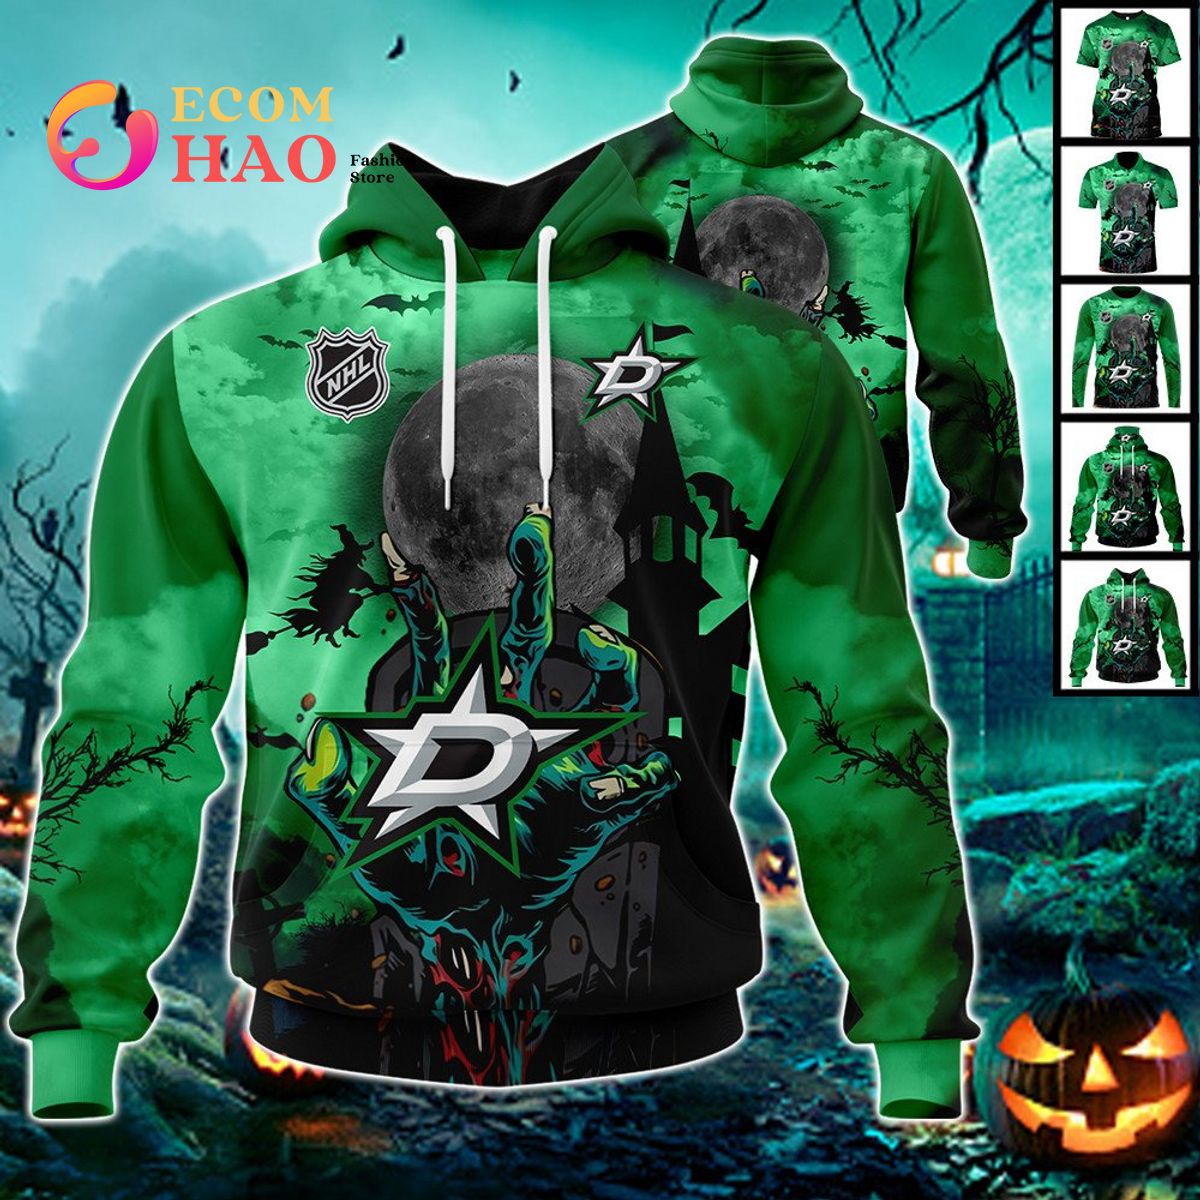 Dallas Stars Iron Maiden Gift For Halloween 3d T-Shirt For Men And